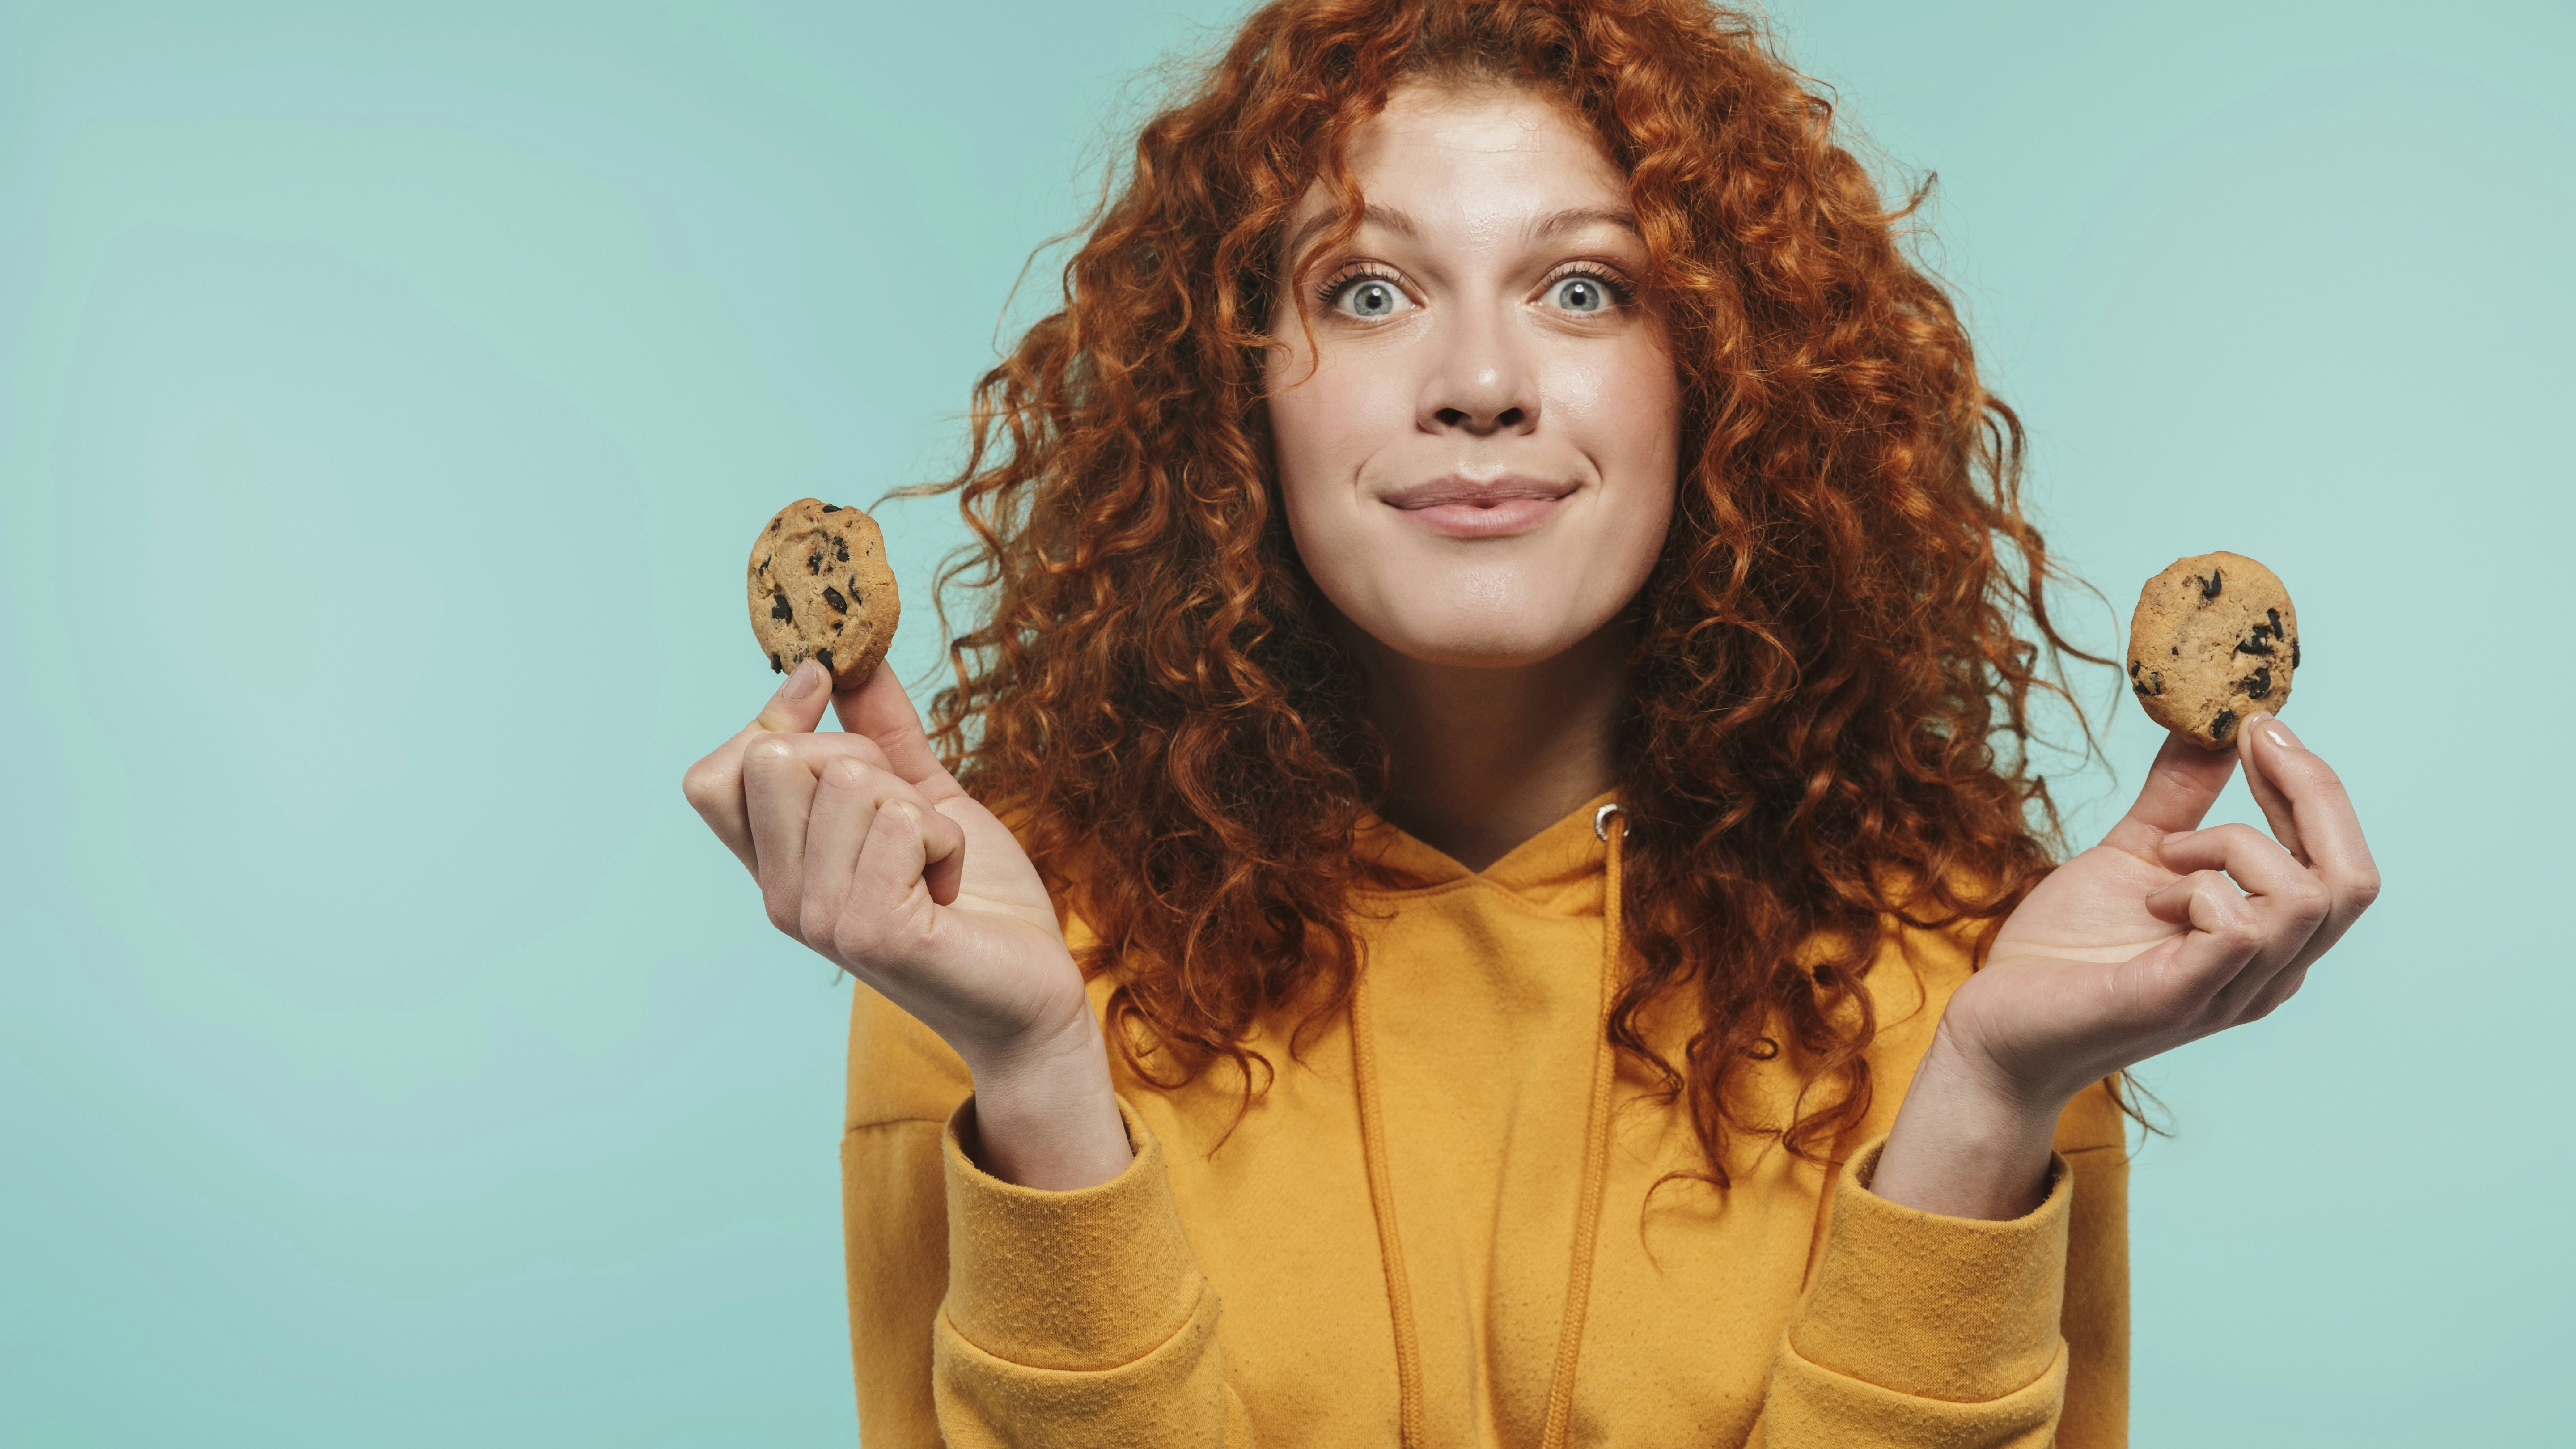 Portrait of happy redhead woman 20s smiling and eating sweet cookies isolated over blue background